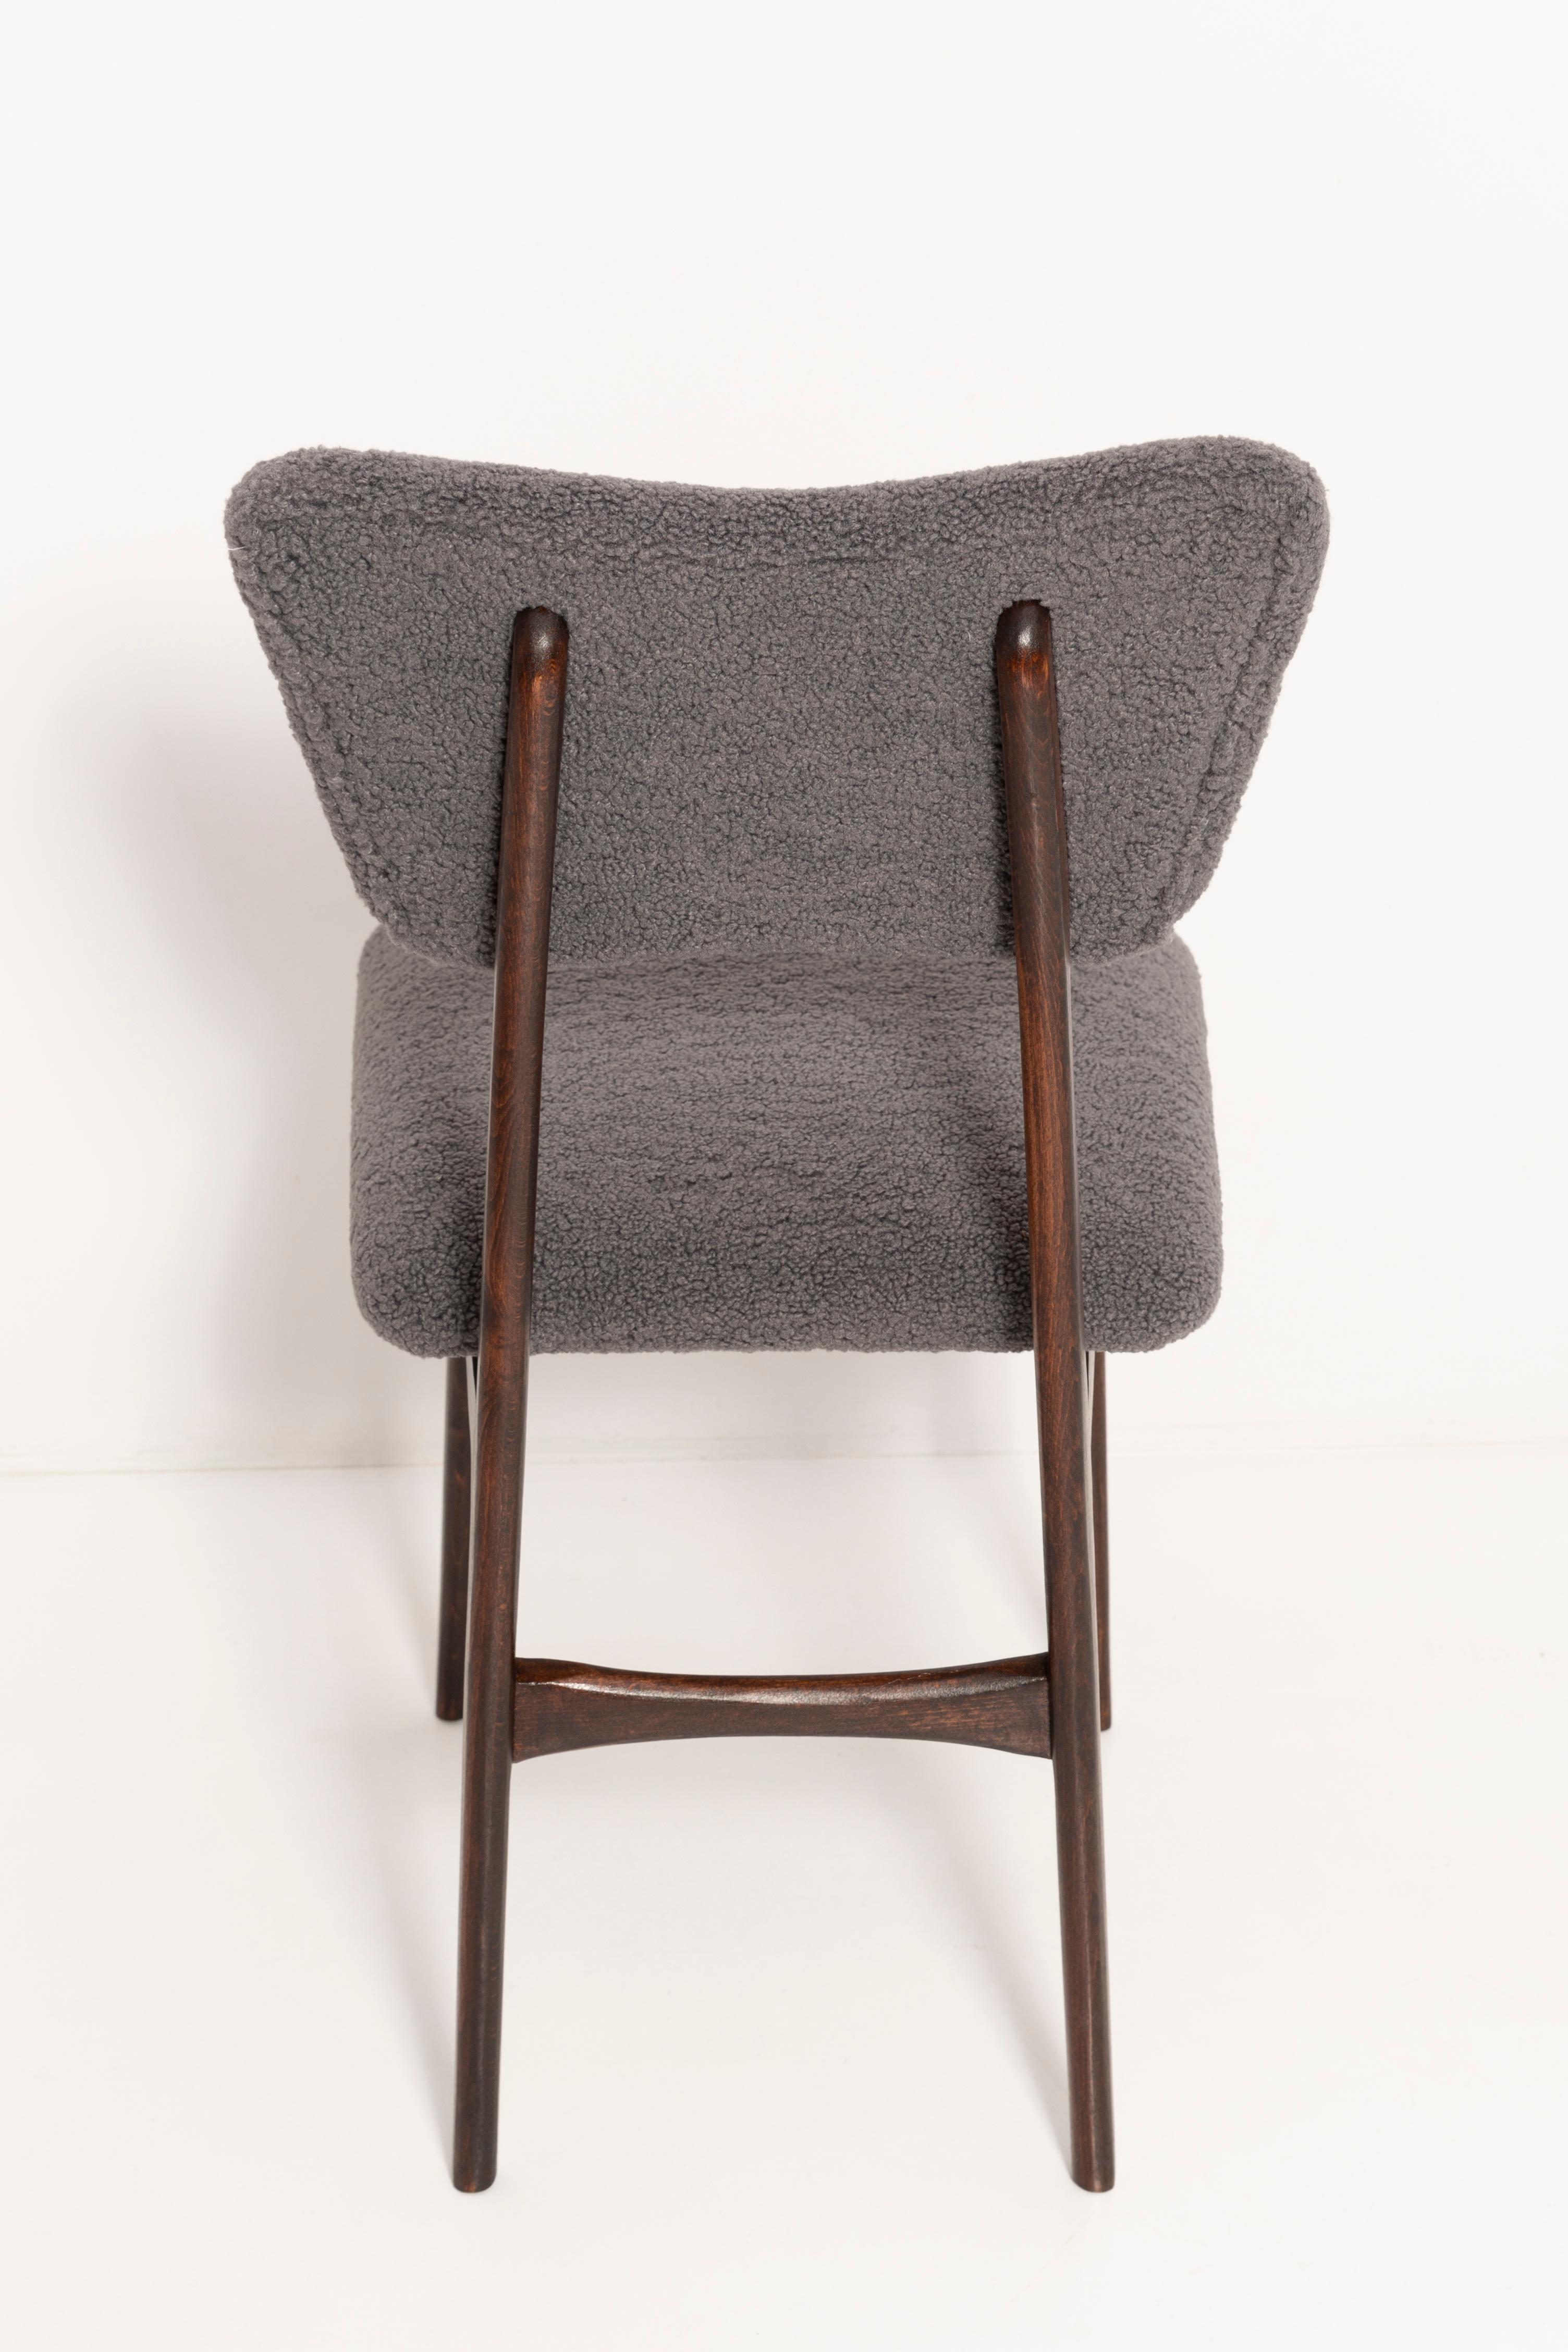 20th Century Dark Gray Boucle Chair, 1960s For Sale 1